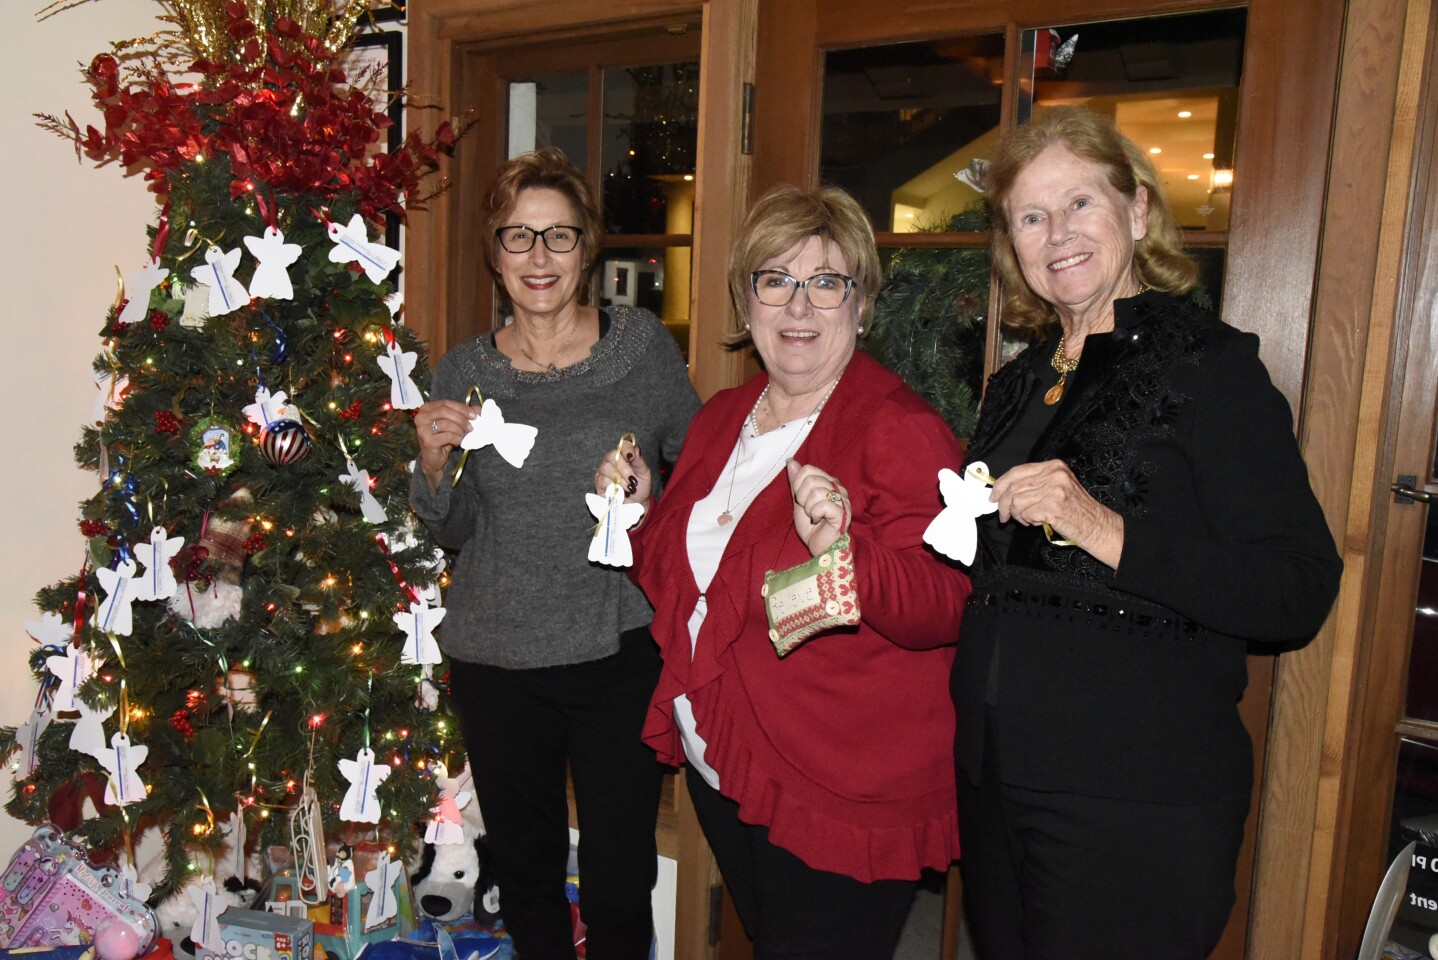 RSF Rotary President Elizabeth Christensen, Programs co-chairs Norma Wiberg and Heather Manion